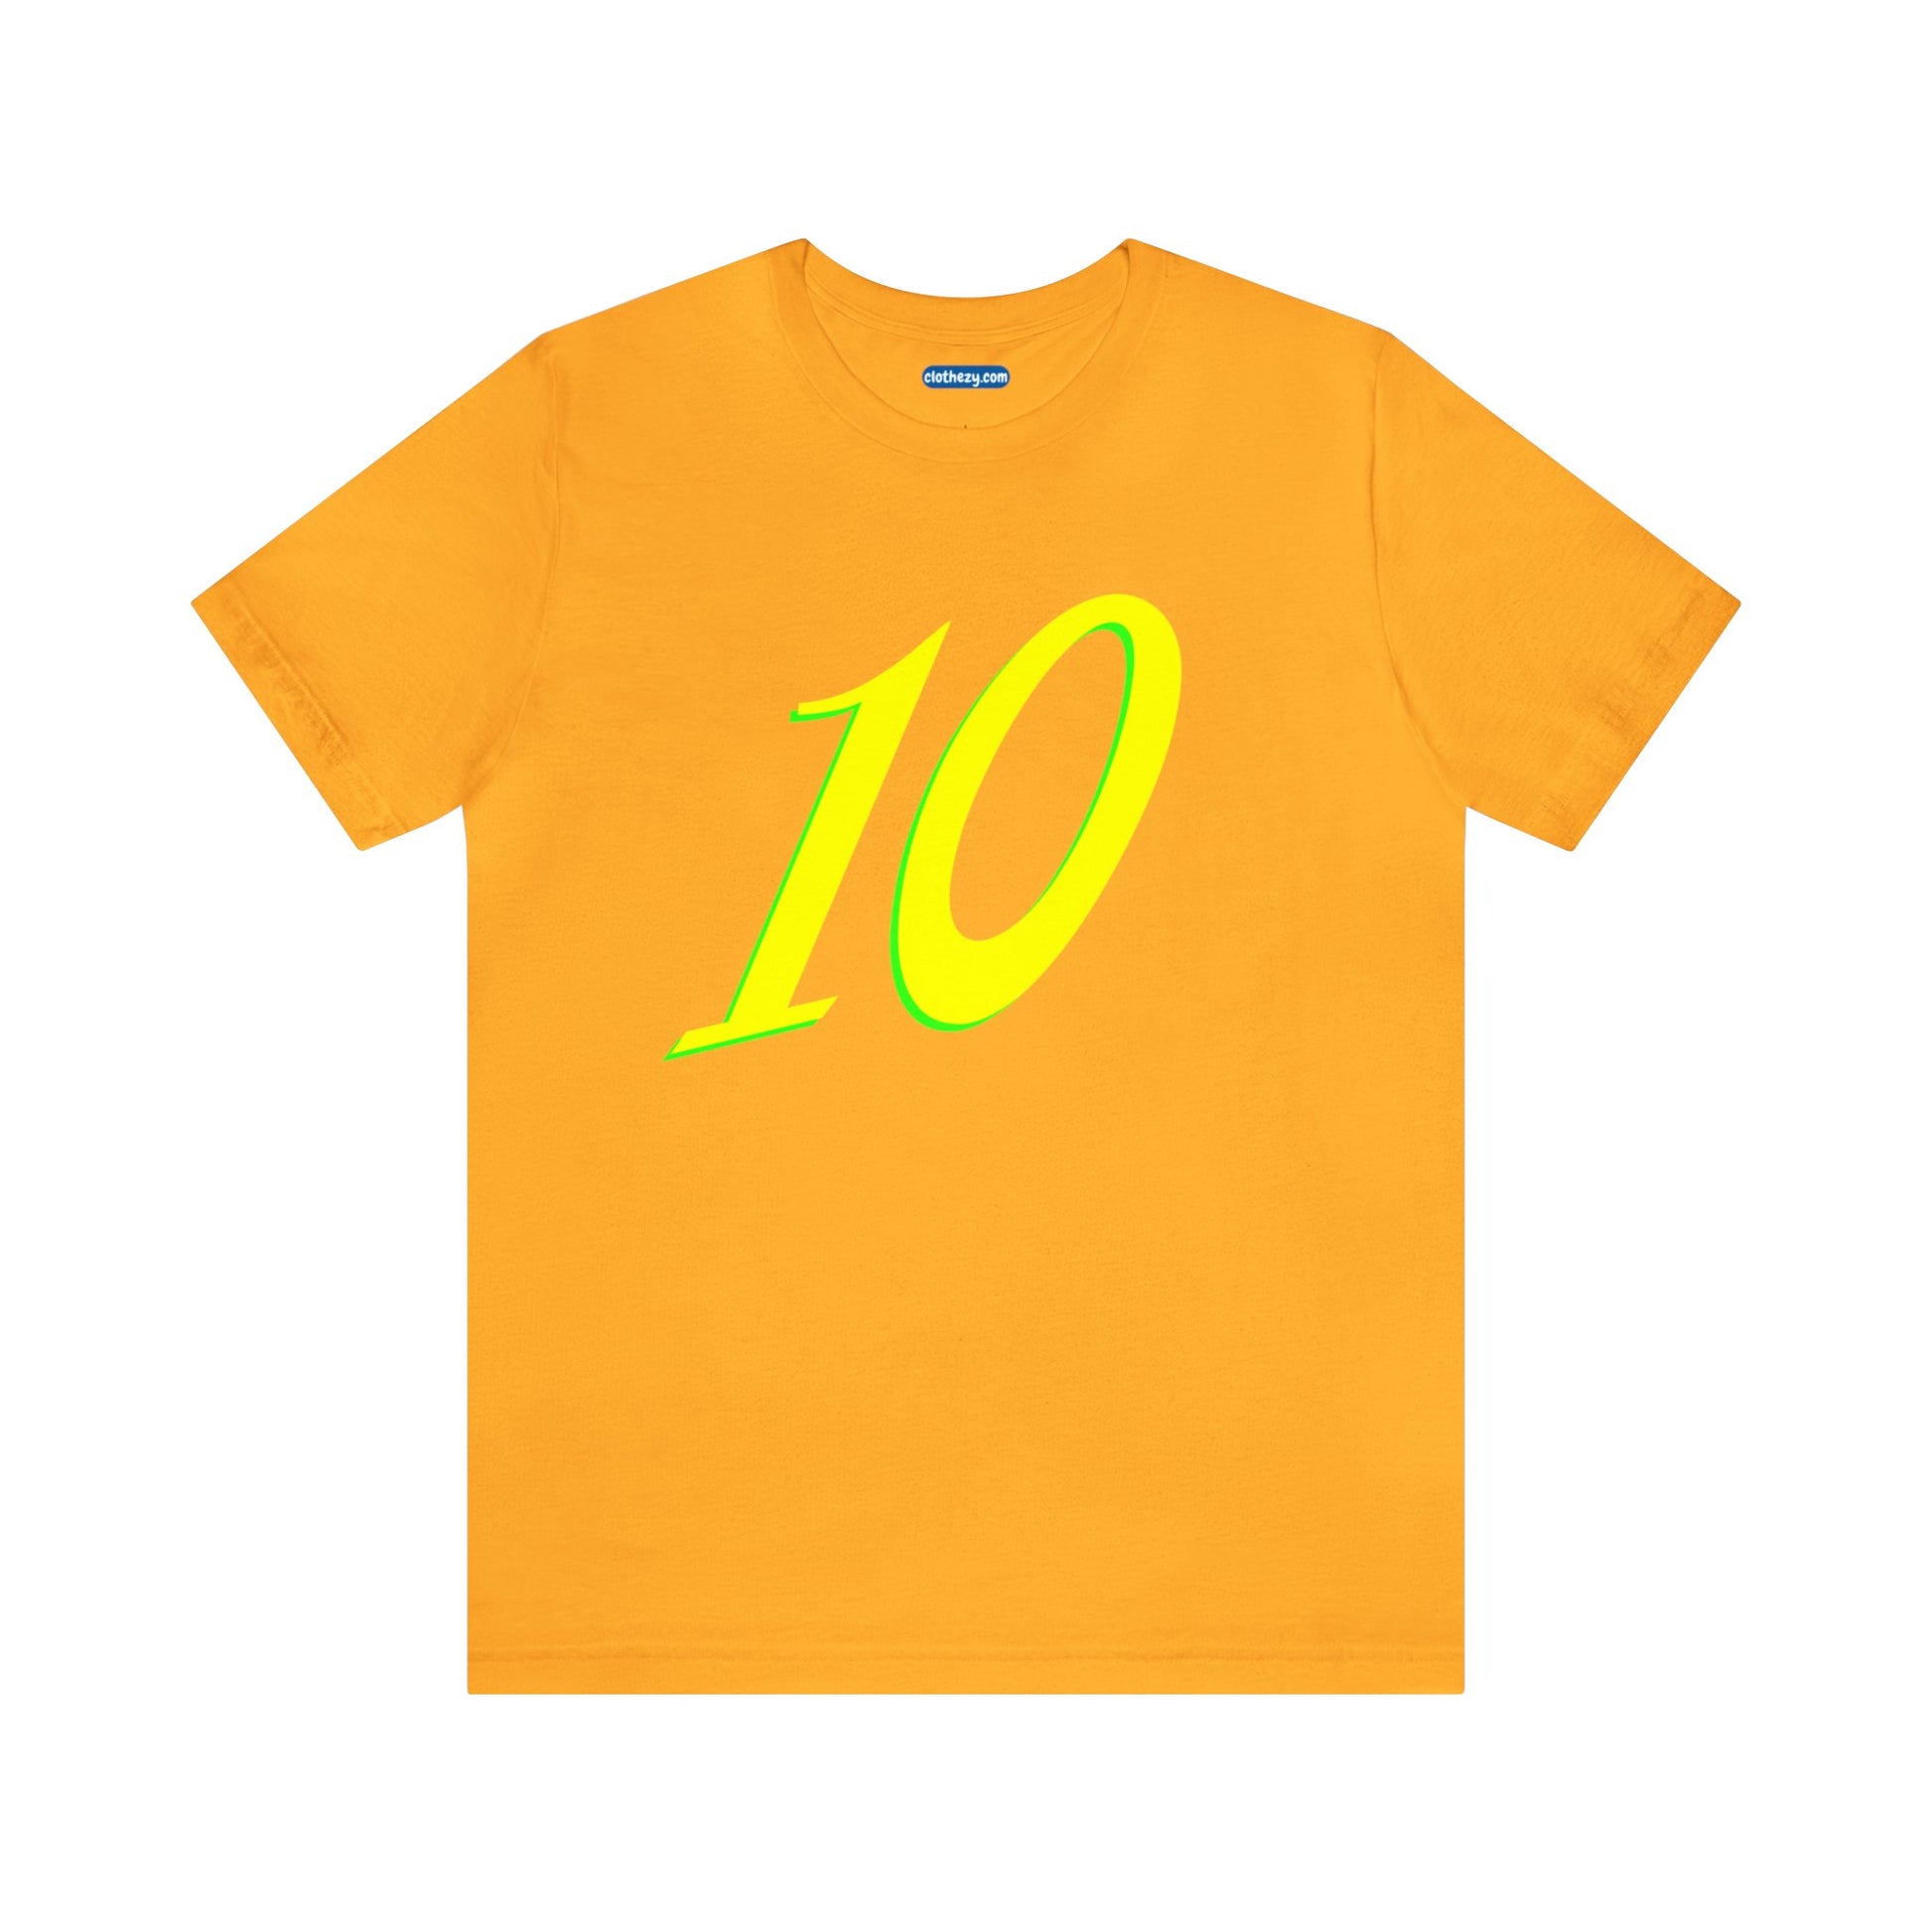 Number 10 Design - Soft Cotton Tee for birthdays and celebrations, Gift for friends and family, Multiple Options by clothezy.com in Gold Size Small - Buy Now